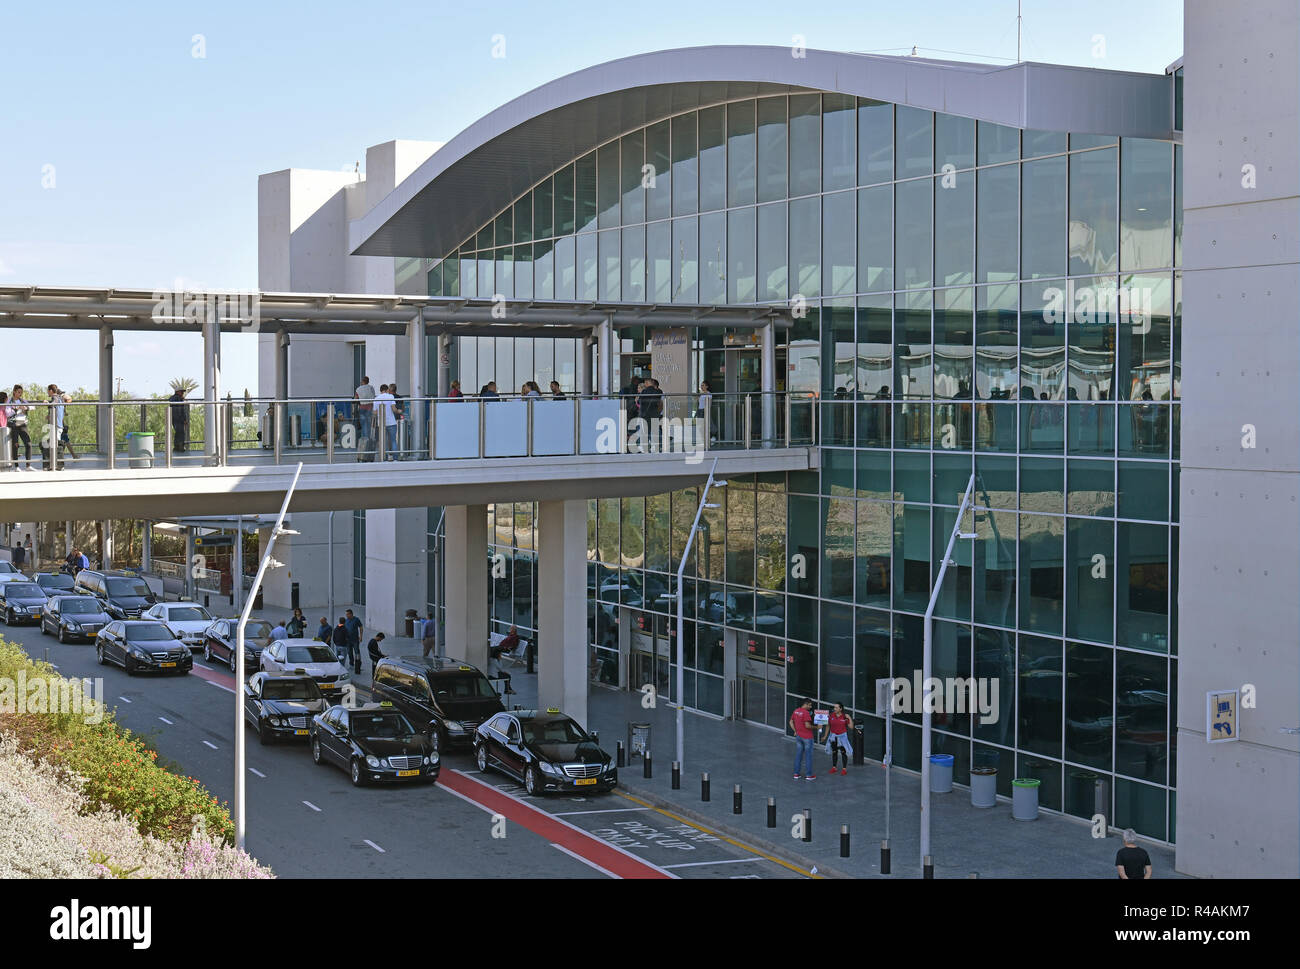 Larnaca, Cyprus - November 6. 2018. Appearance of the international airport Stock Photo